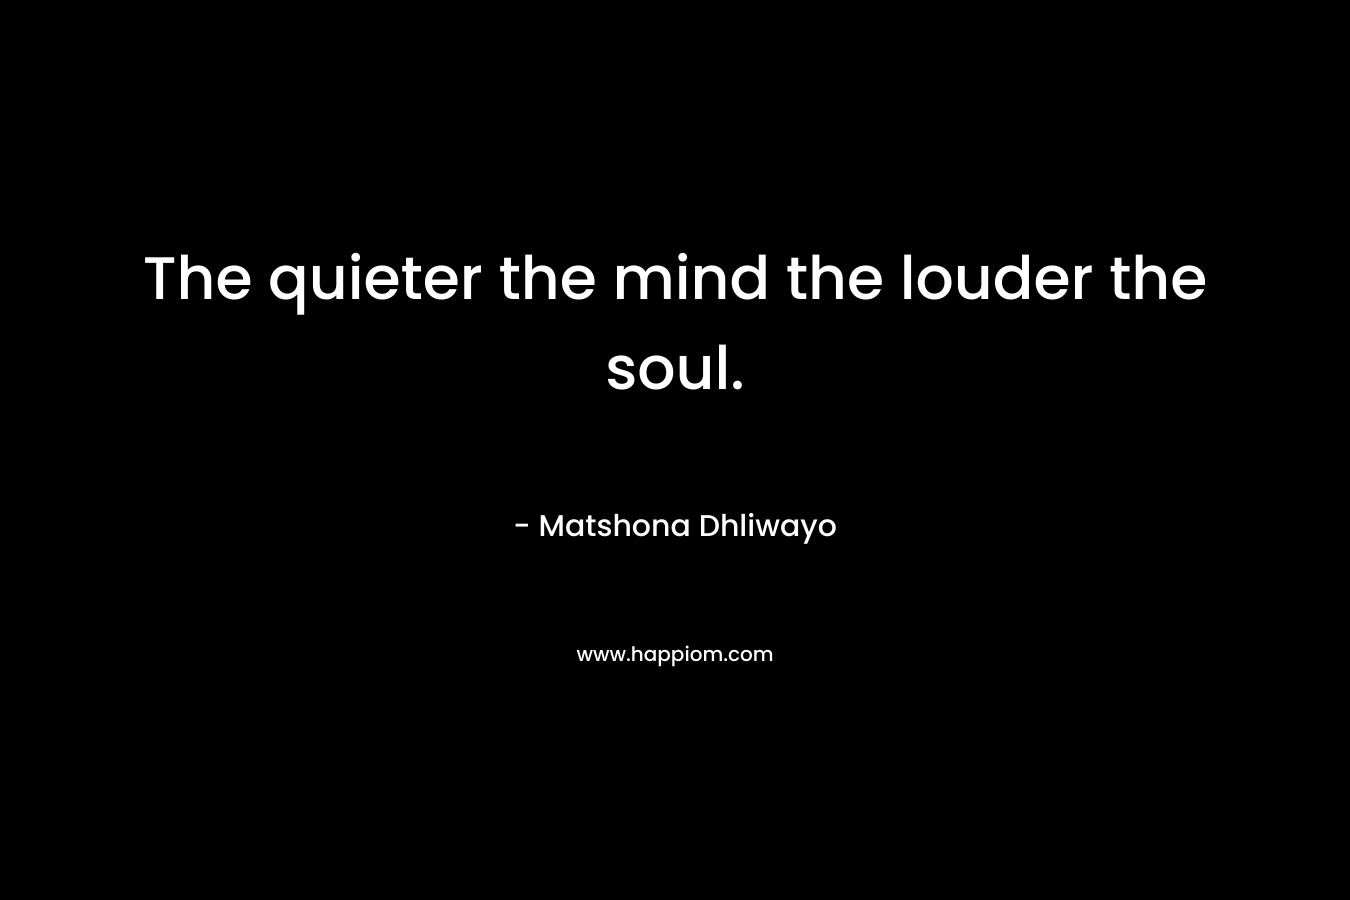 The quieter the mind the louder the soul.